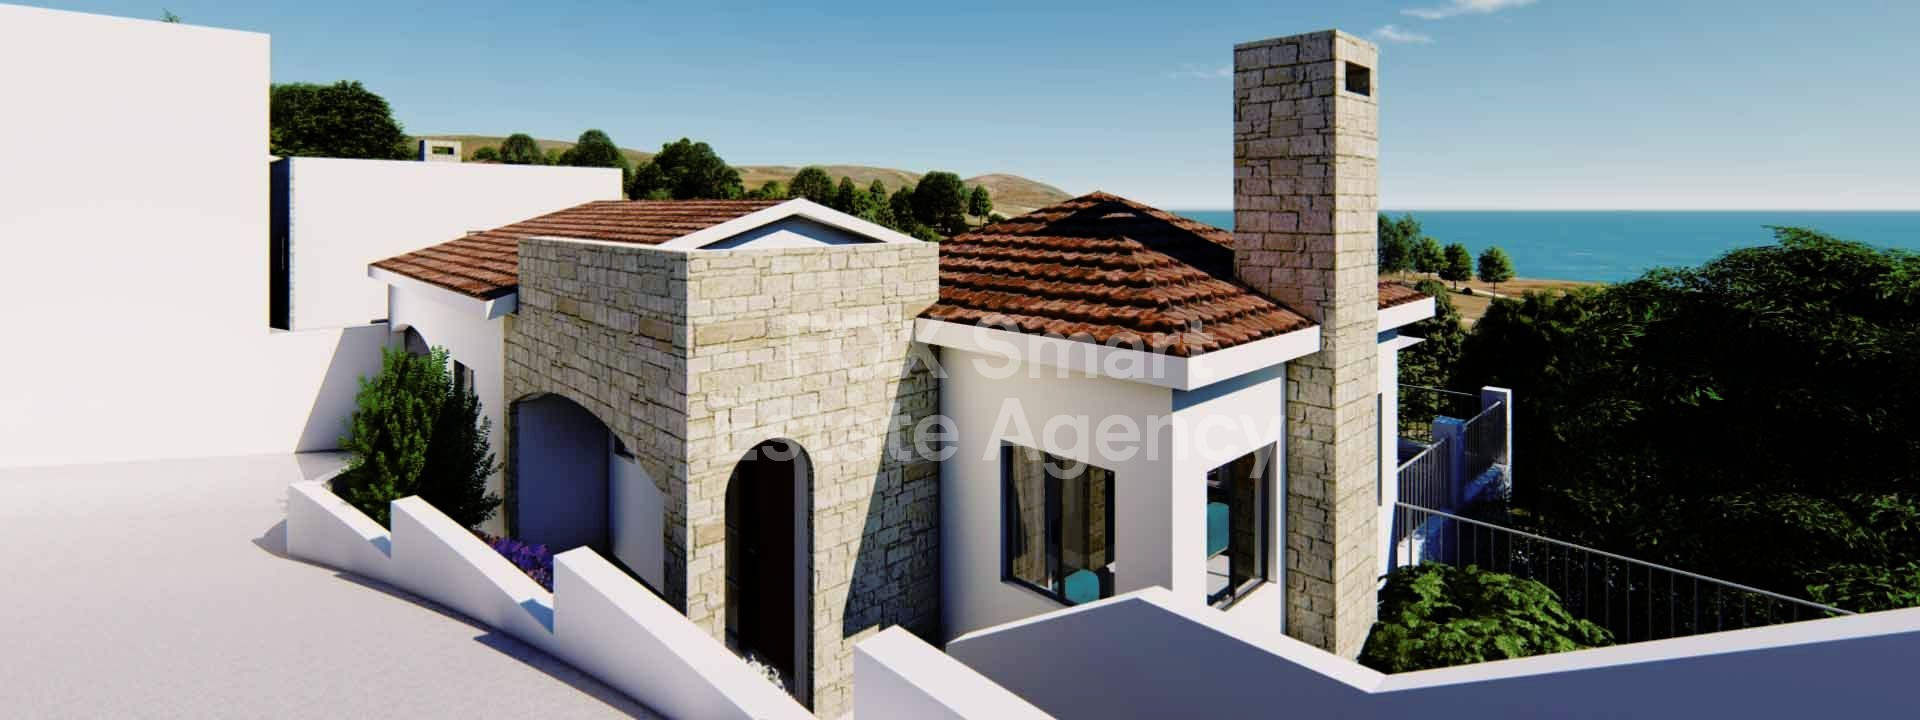 House, For Sale, Paphos, Neo Chorio  3 Bedrooms 2 Bathrooms.....